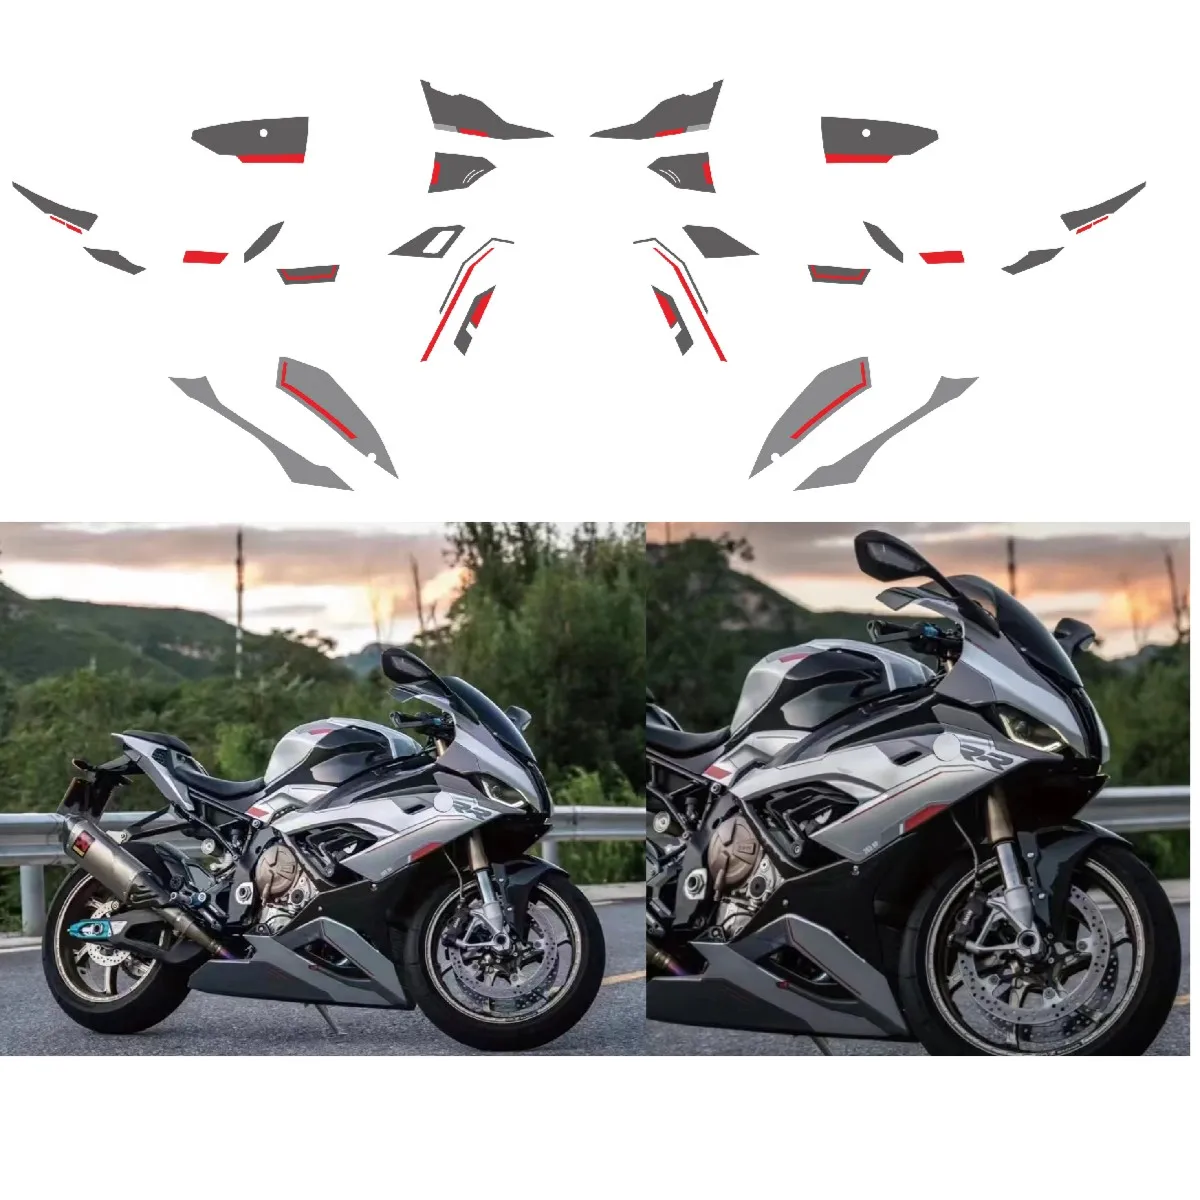 Motorcycle fairing sticker is suitable for M1000RR S1000RR 2019 2020 2021 2022 Auto Expo sticker protection brand logo sticker for vw mqb evo golf8 golf 8 mk8 2020 2021 5hg 927 225 5hg927225 new parking brake auto hold switch button